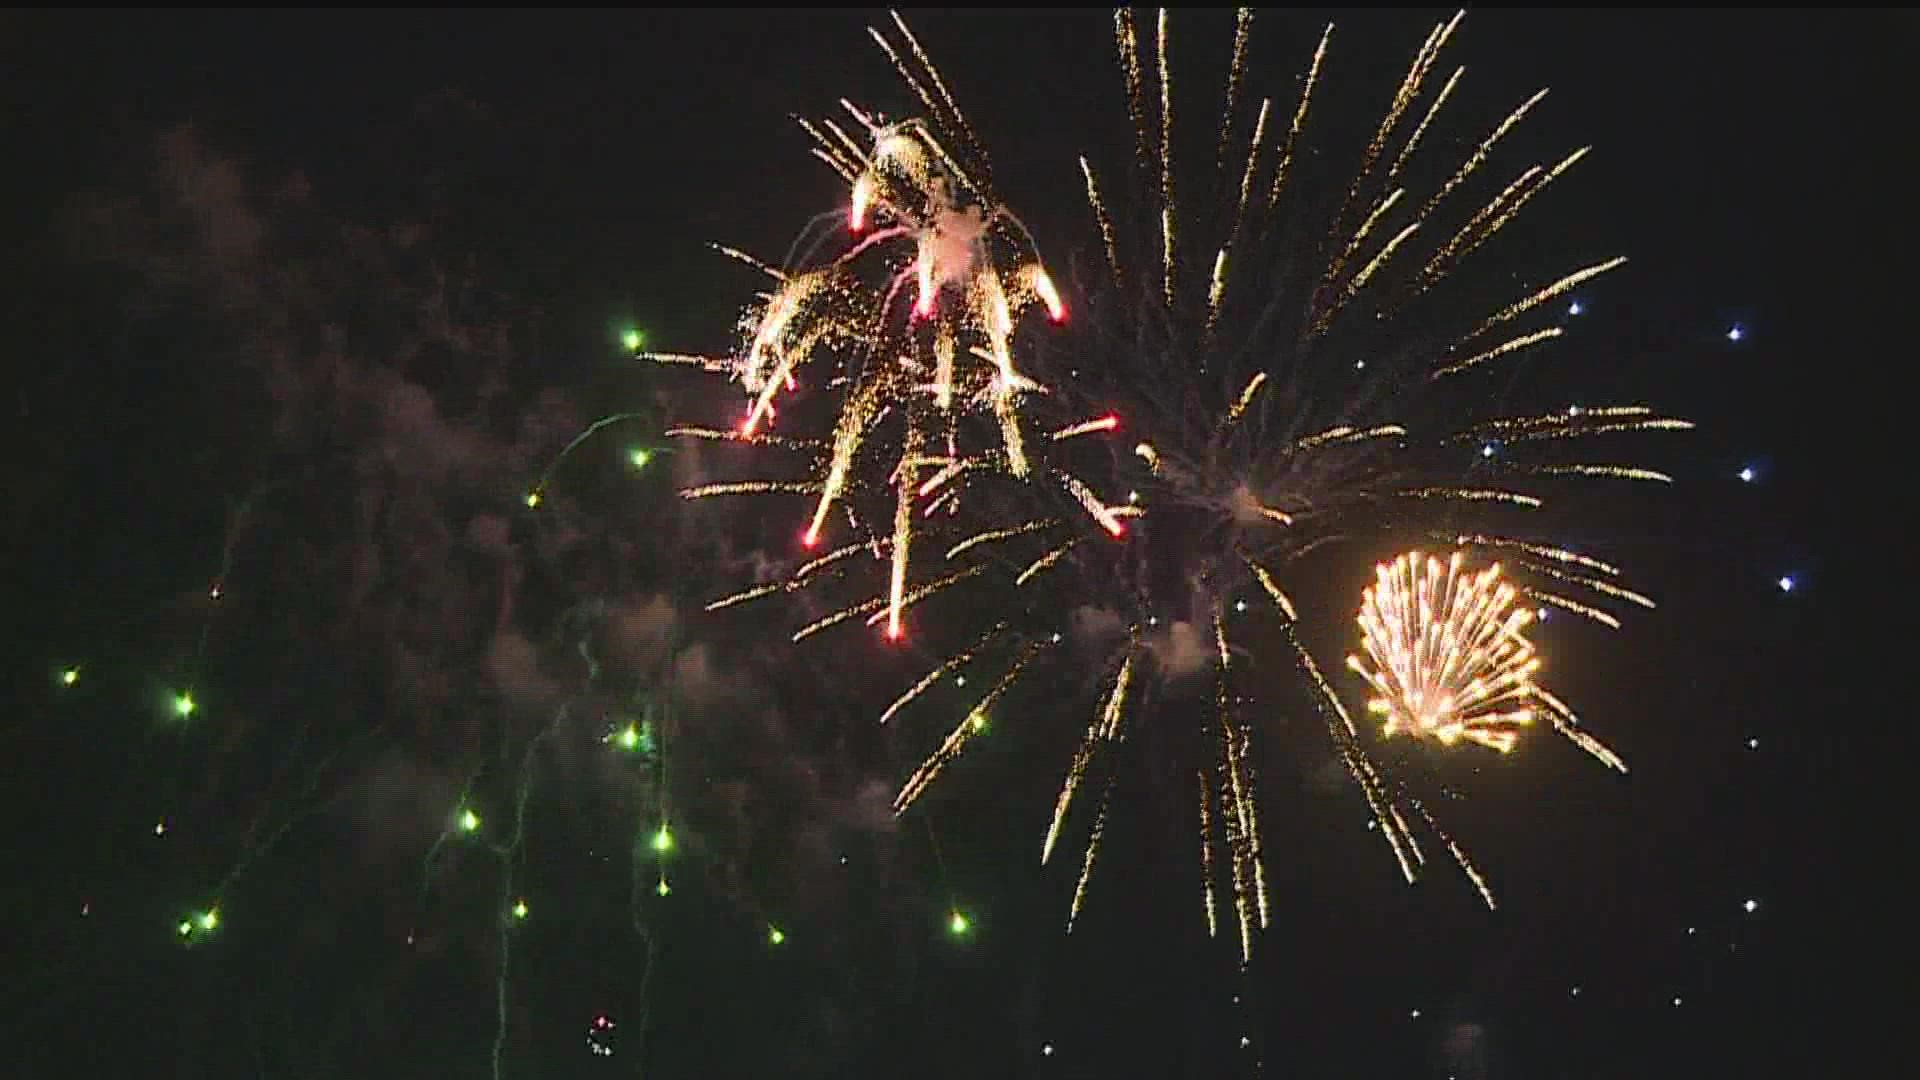 Prices across the board have increased for fireworks shows, causing cities and organizers to  adjust.